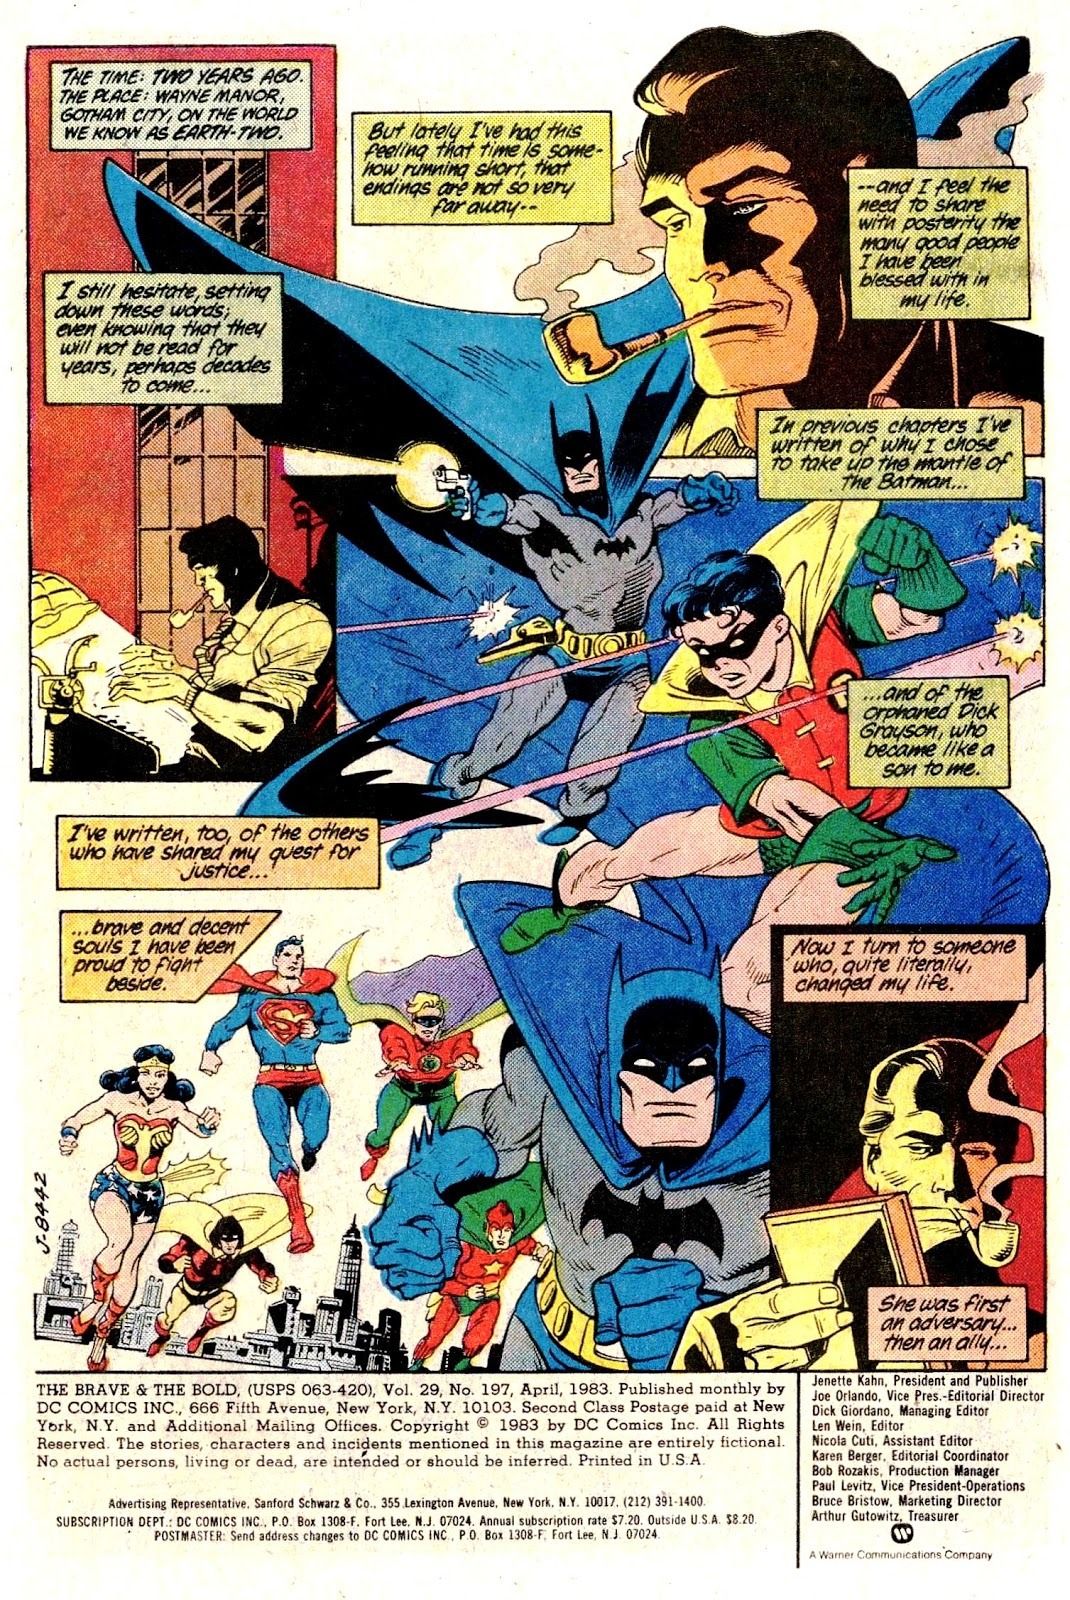 Bat and Cat Romance — Earth-Two: The Golden Age of BatCat